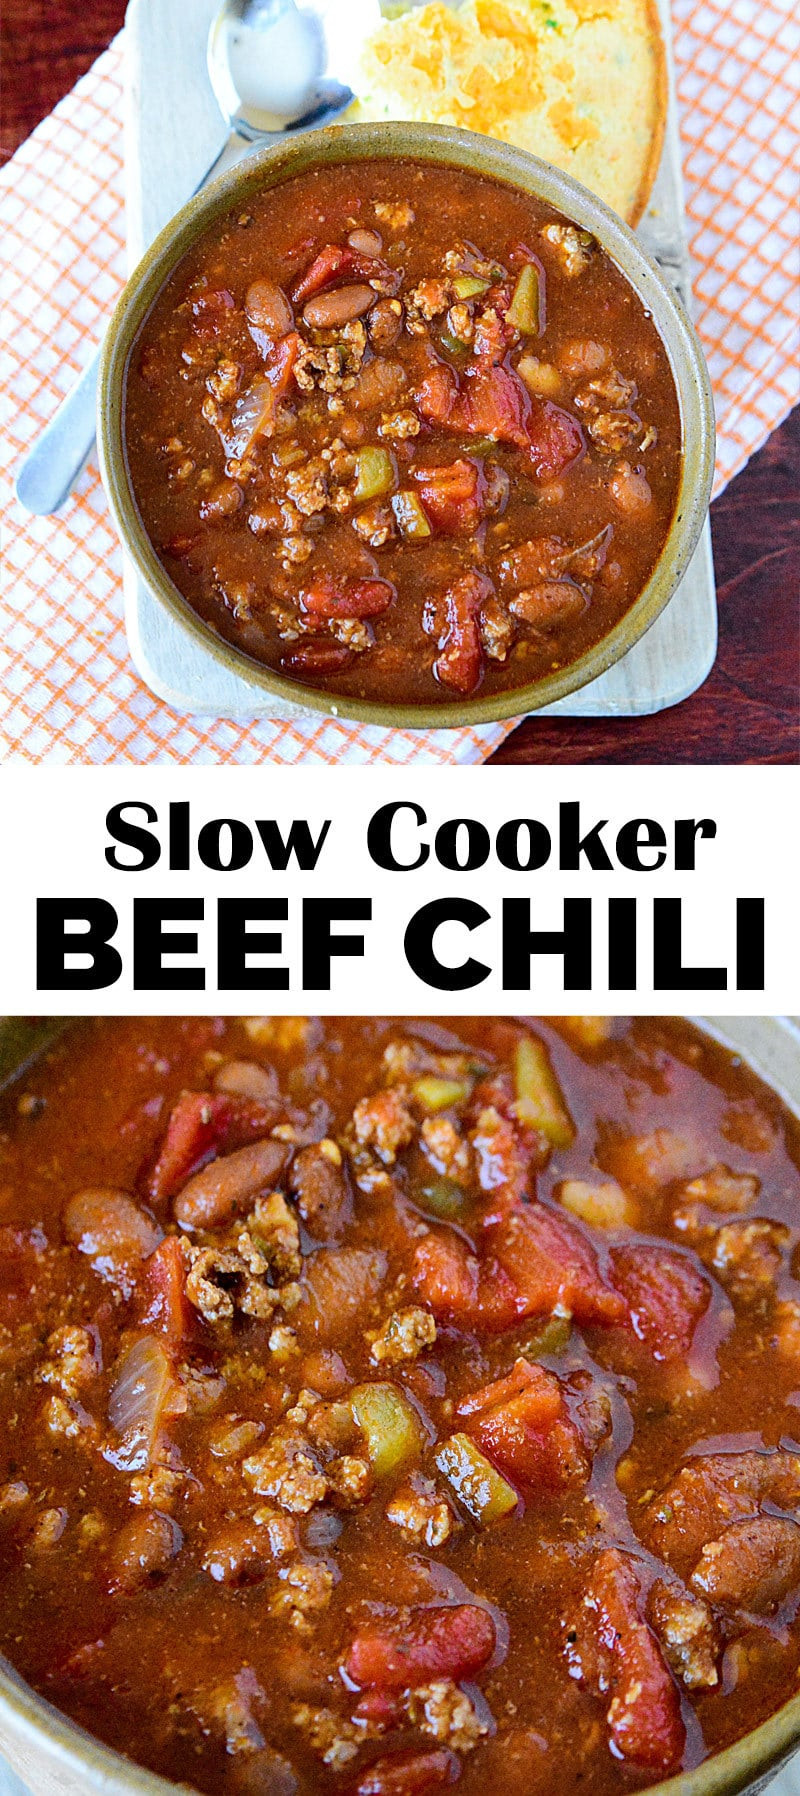 Chili Recipes With Beef
 Slow Cooker Beef Chili Recipe